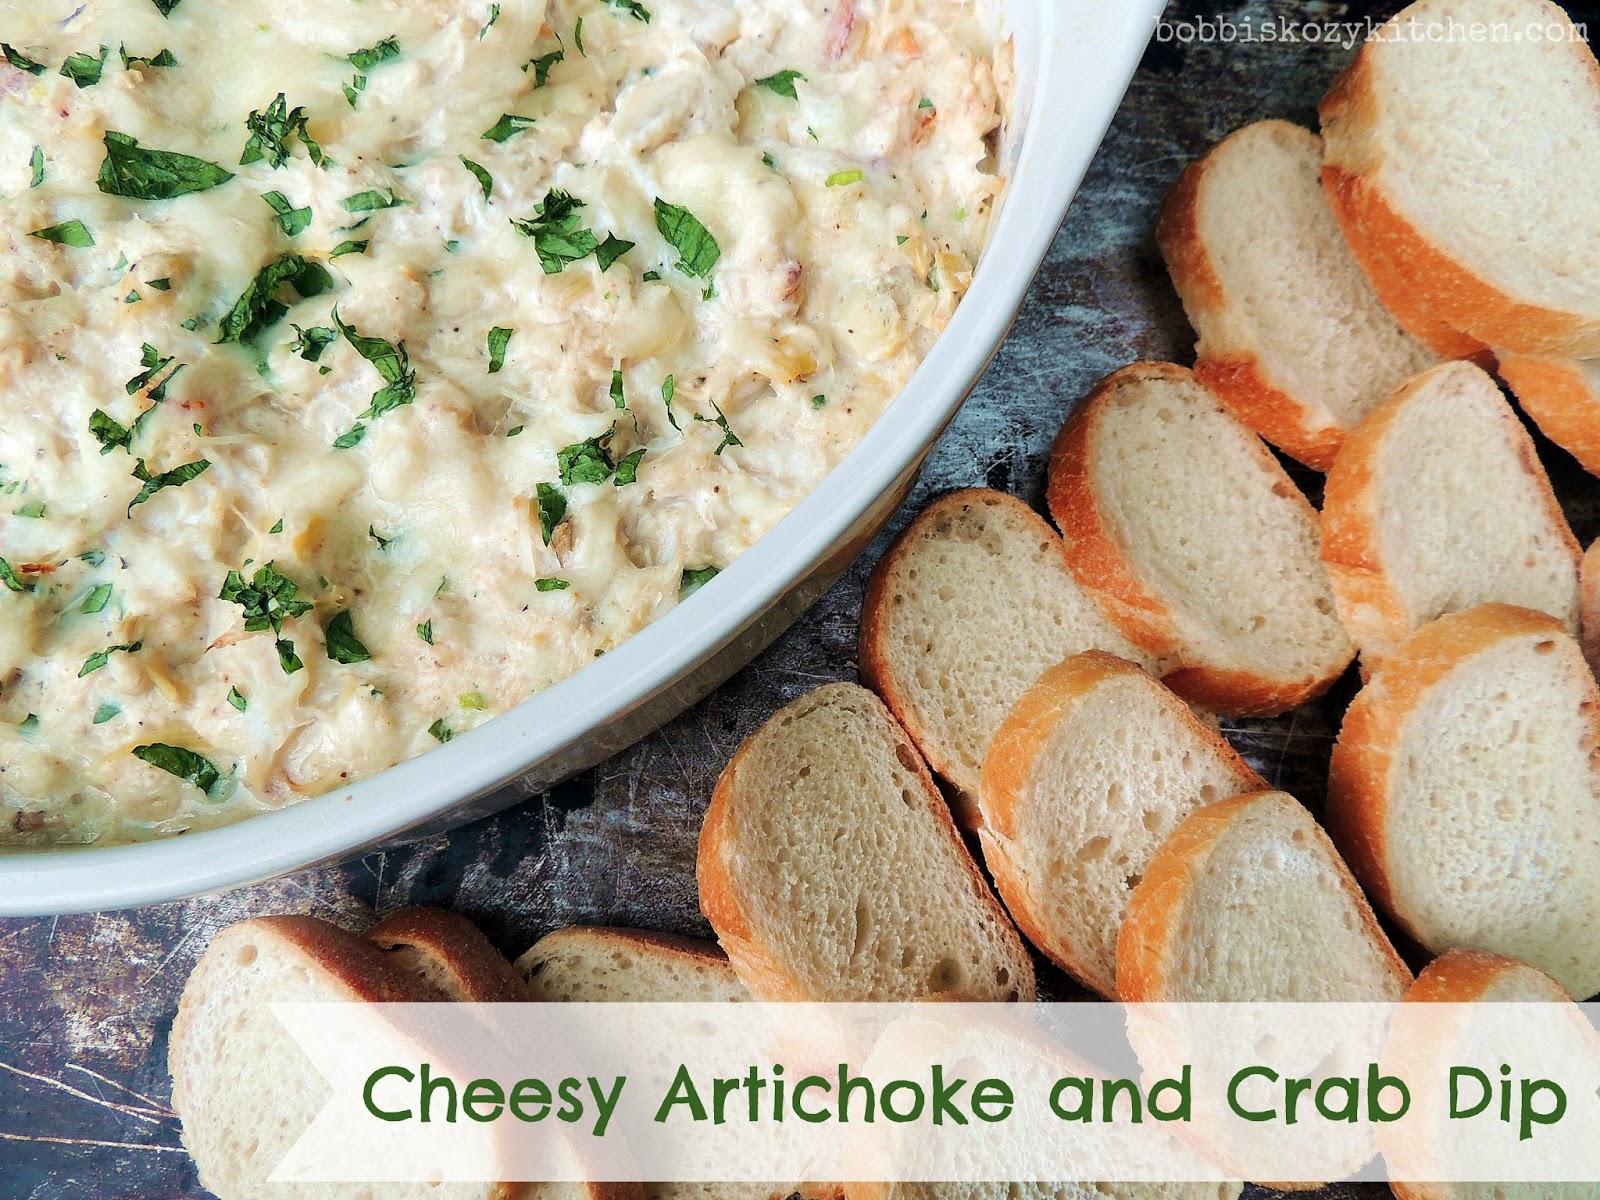 If you are looking for an appetizer that is sure to impress, this Cheesy Artichoke Crab Dip is it. Warm and cheesy, with tender artichoke hearts and luscious crab, your guests will be fighting for the last bite! From www.bobbiskozykitchen.com #appetizer, #crab #dip